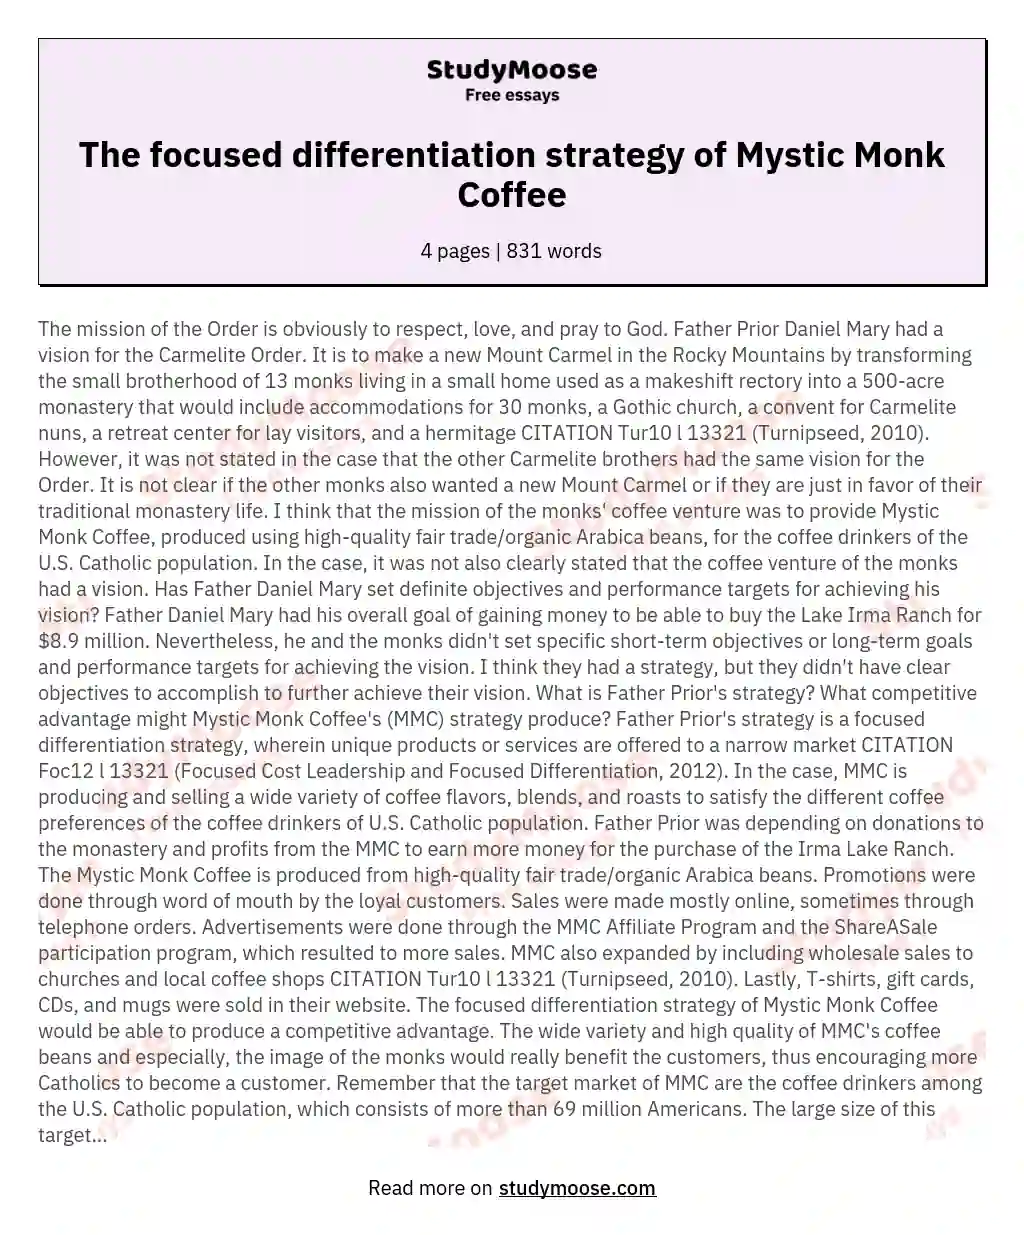 The focused differentiation strategy of Mystic Monk Coffee